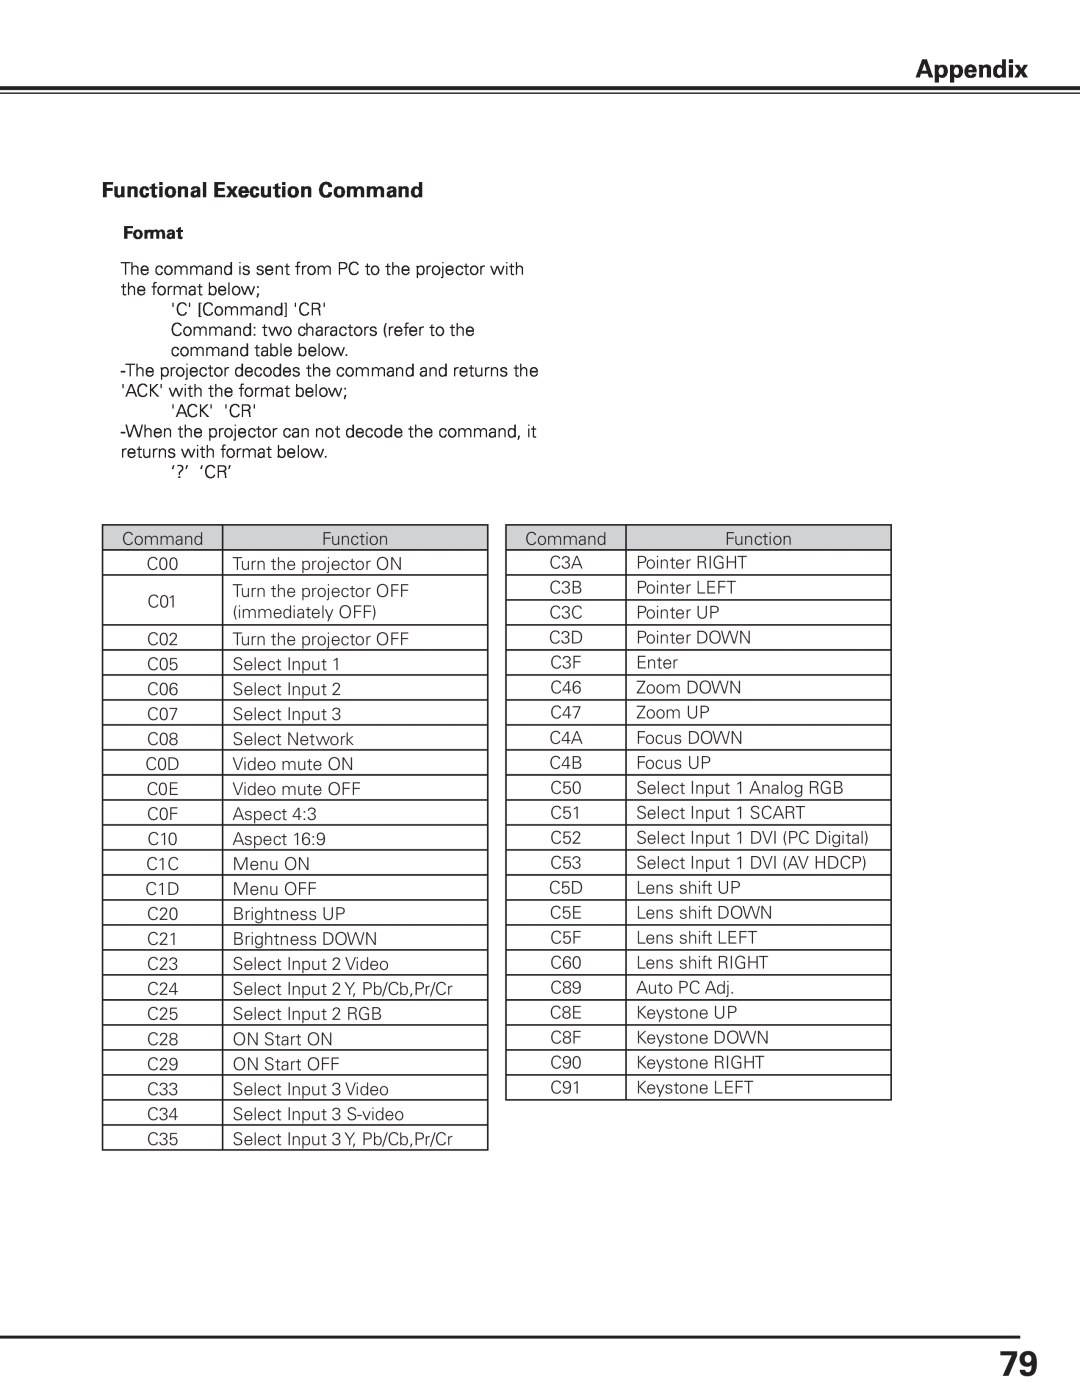 Canon 7585 manual Appendix, Functional Execution Command, Format 